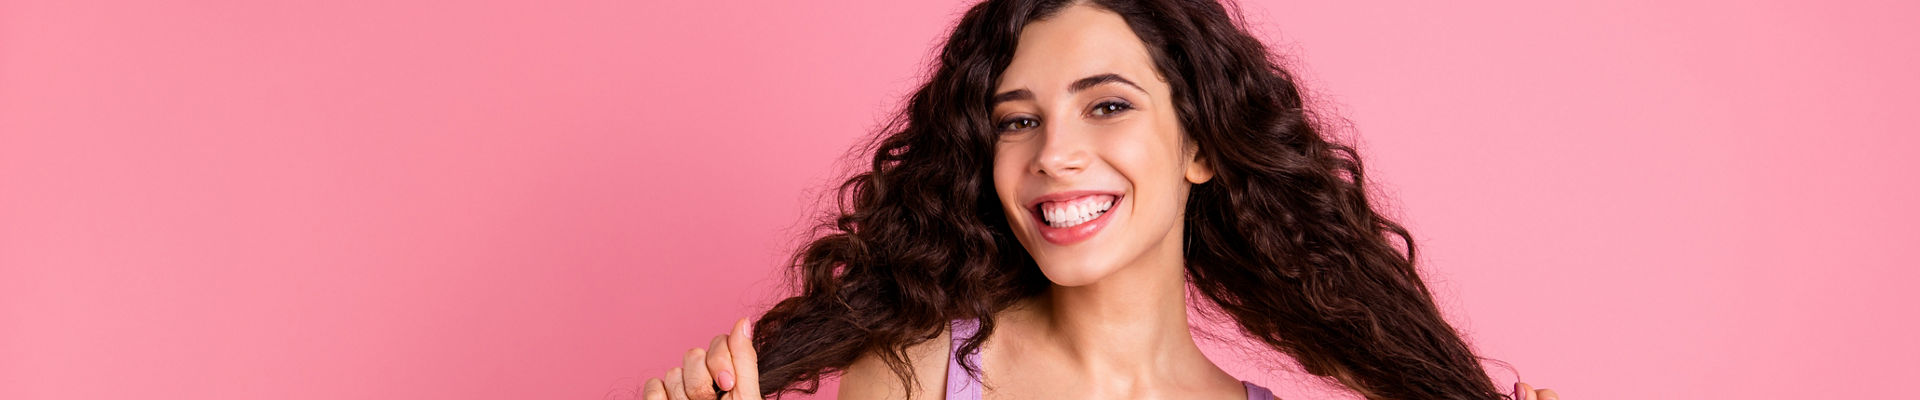 Woman with long curly hair and big smile on white background